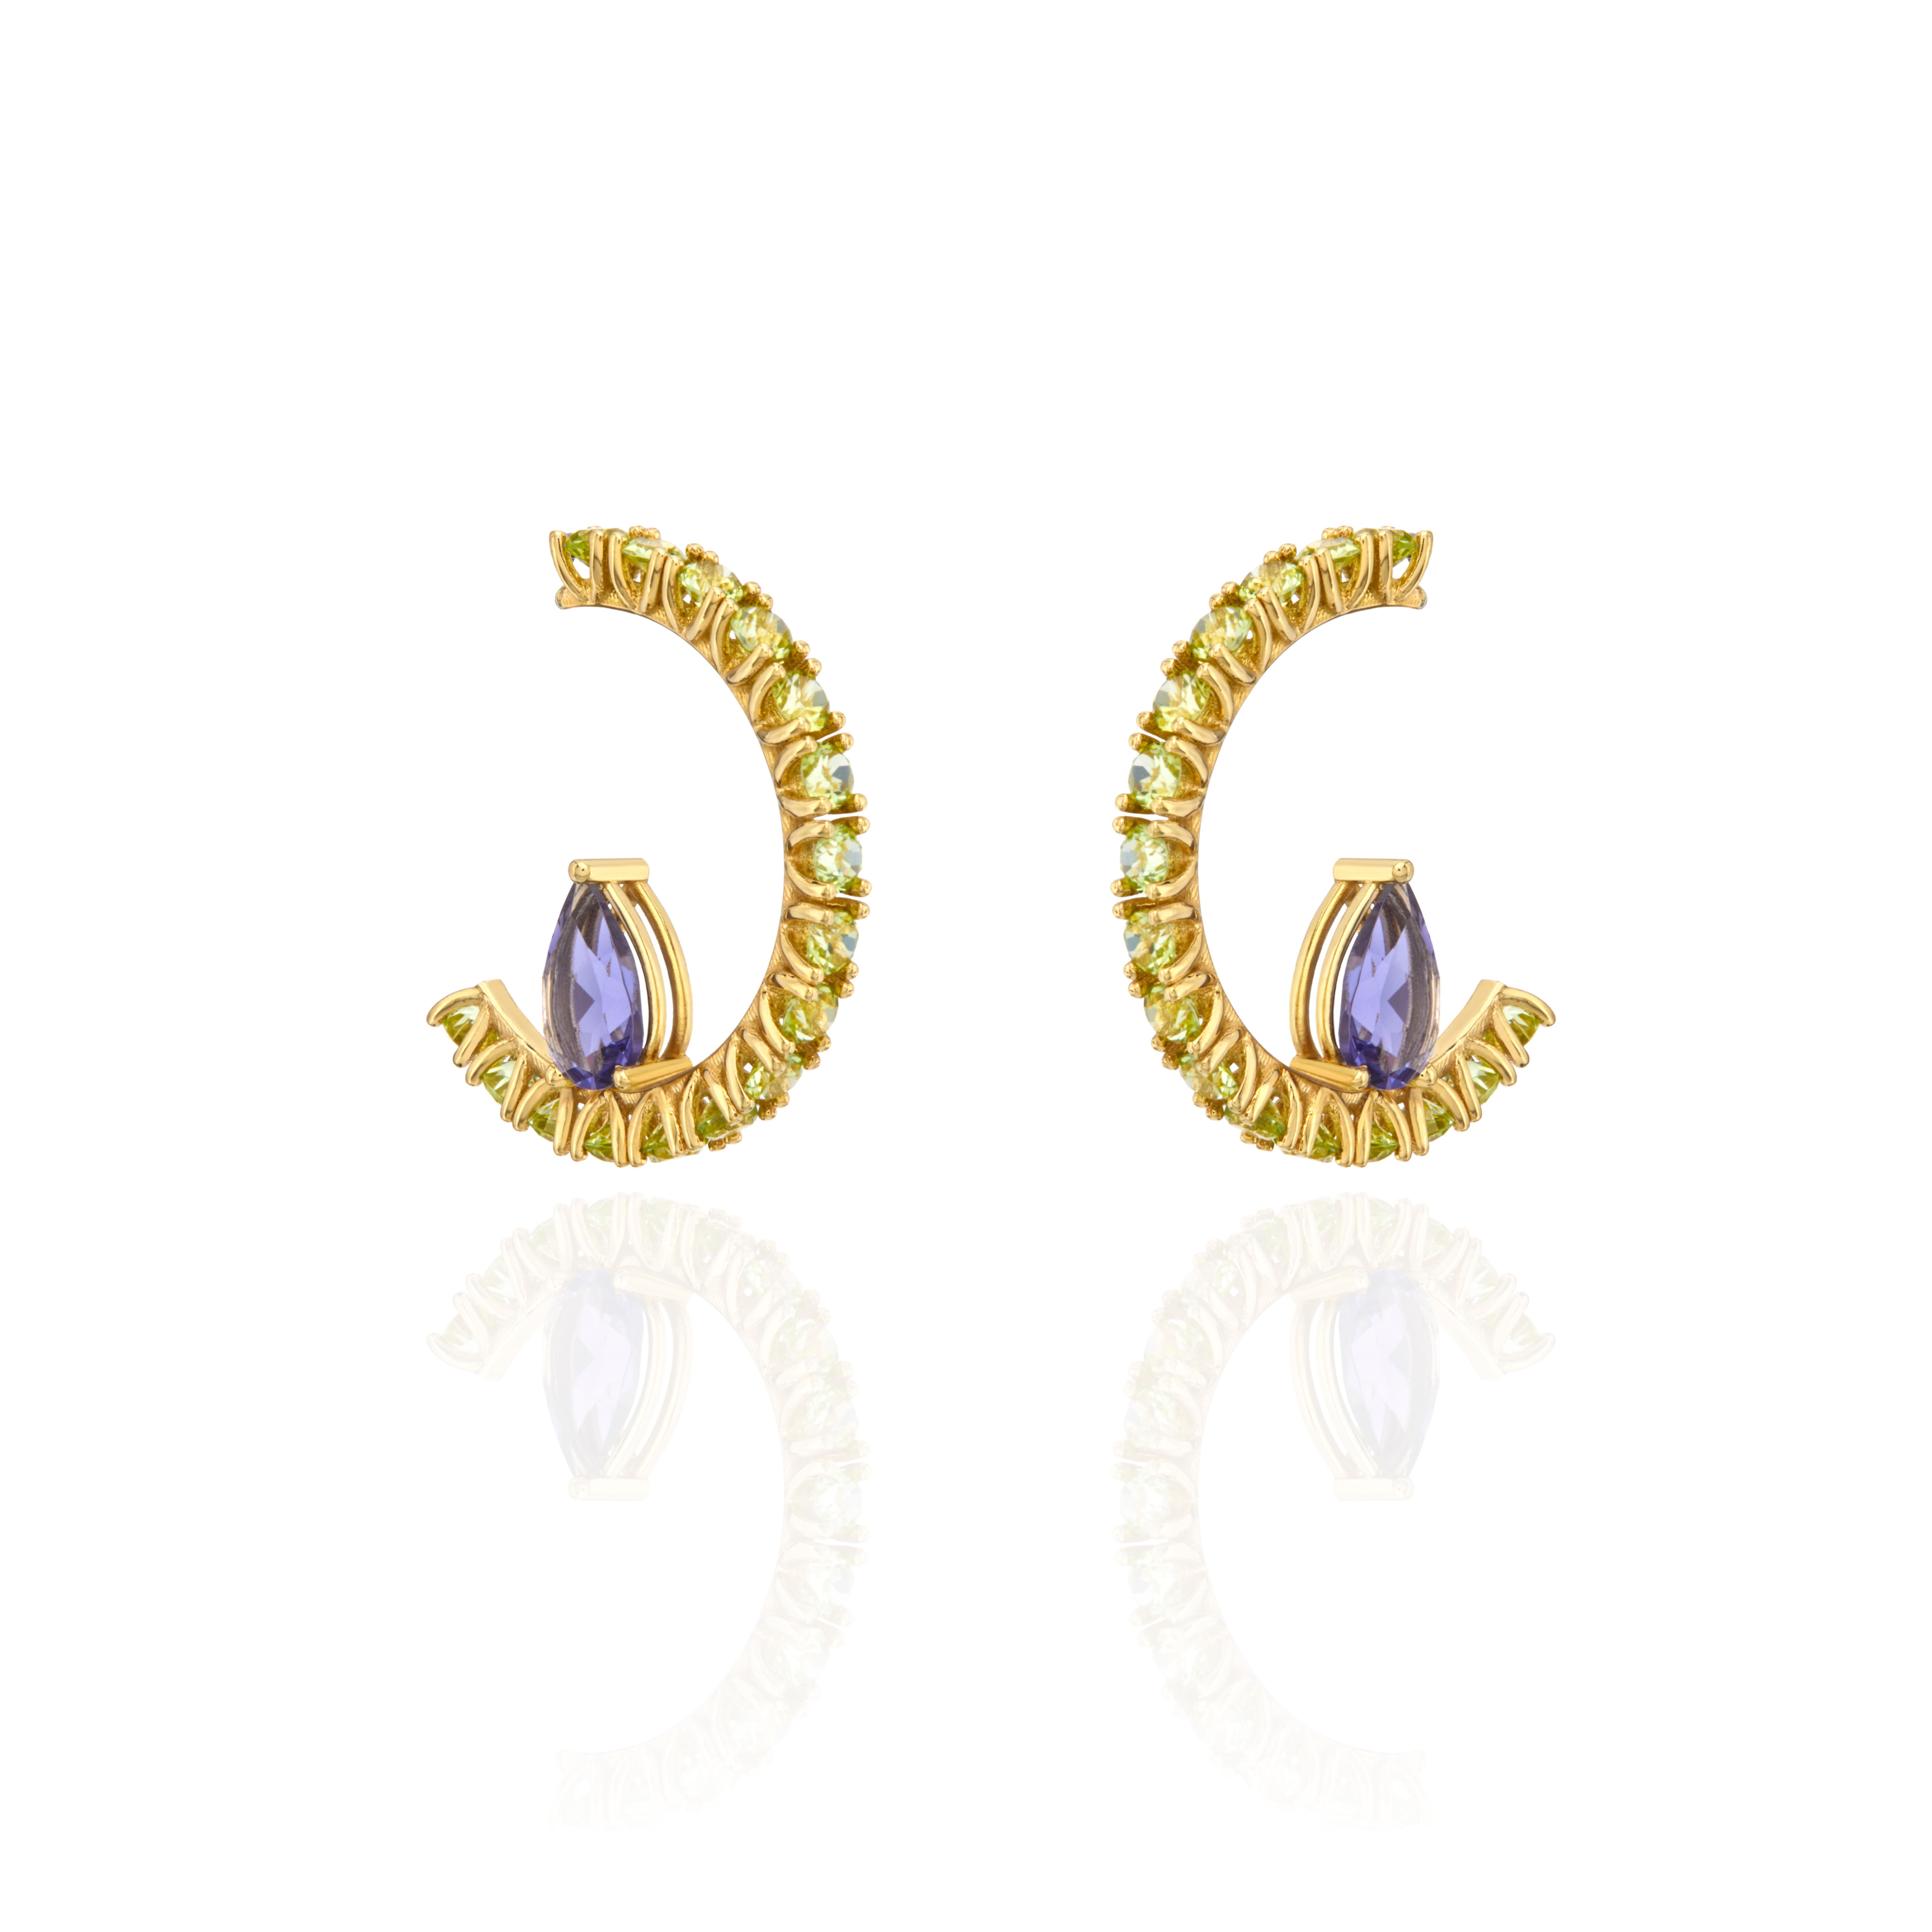 Romantic Prong Hoop Earrings in 18kt Yellow Gold with Iolite and Peridot in Stock For Sale